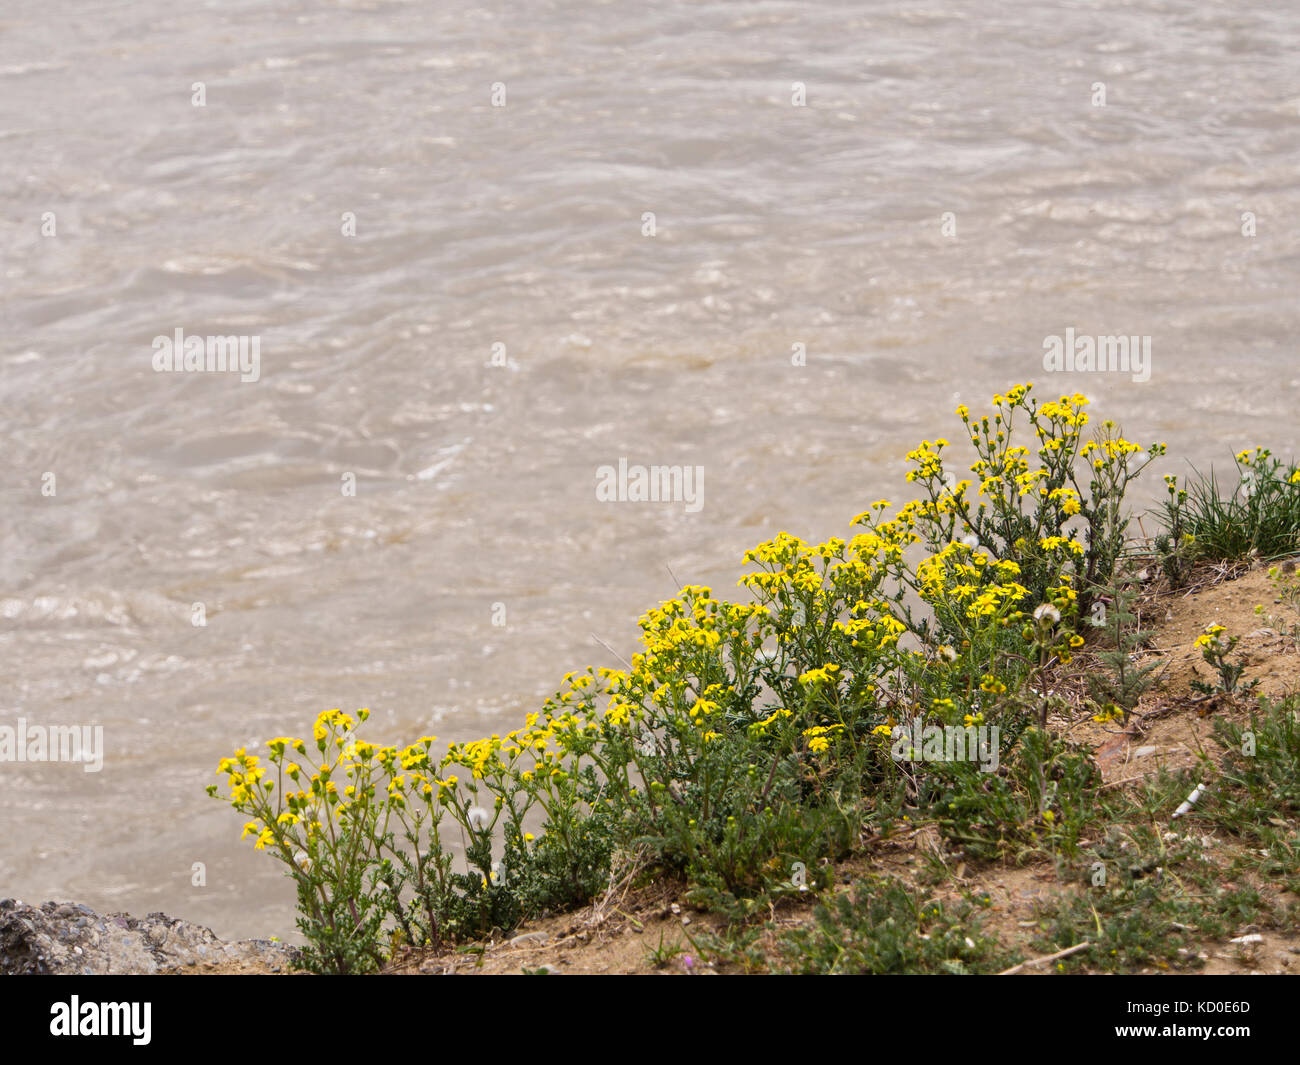 The Kura river in springtime, brown with earth and silt from the Caucasus mountains, running through much of Georgia, yellow wildflowers on the banks Stock Photo